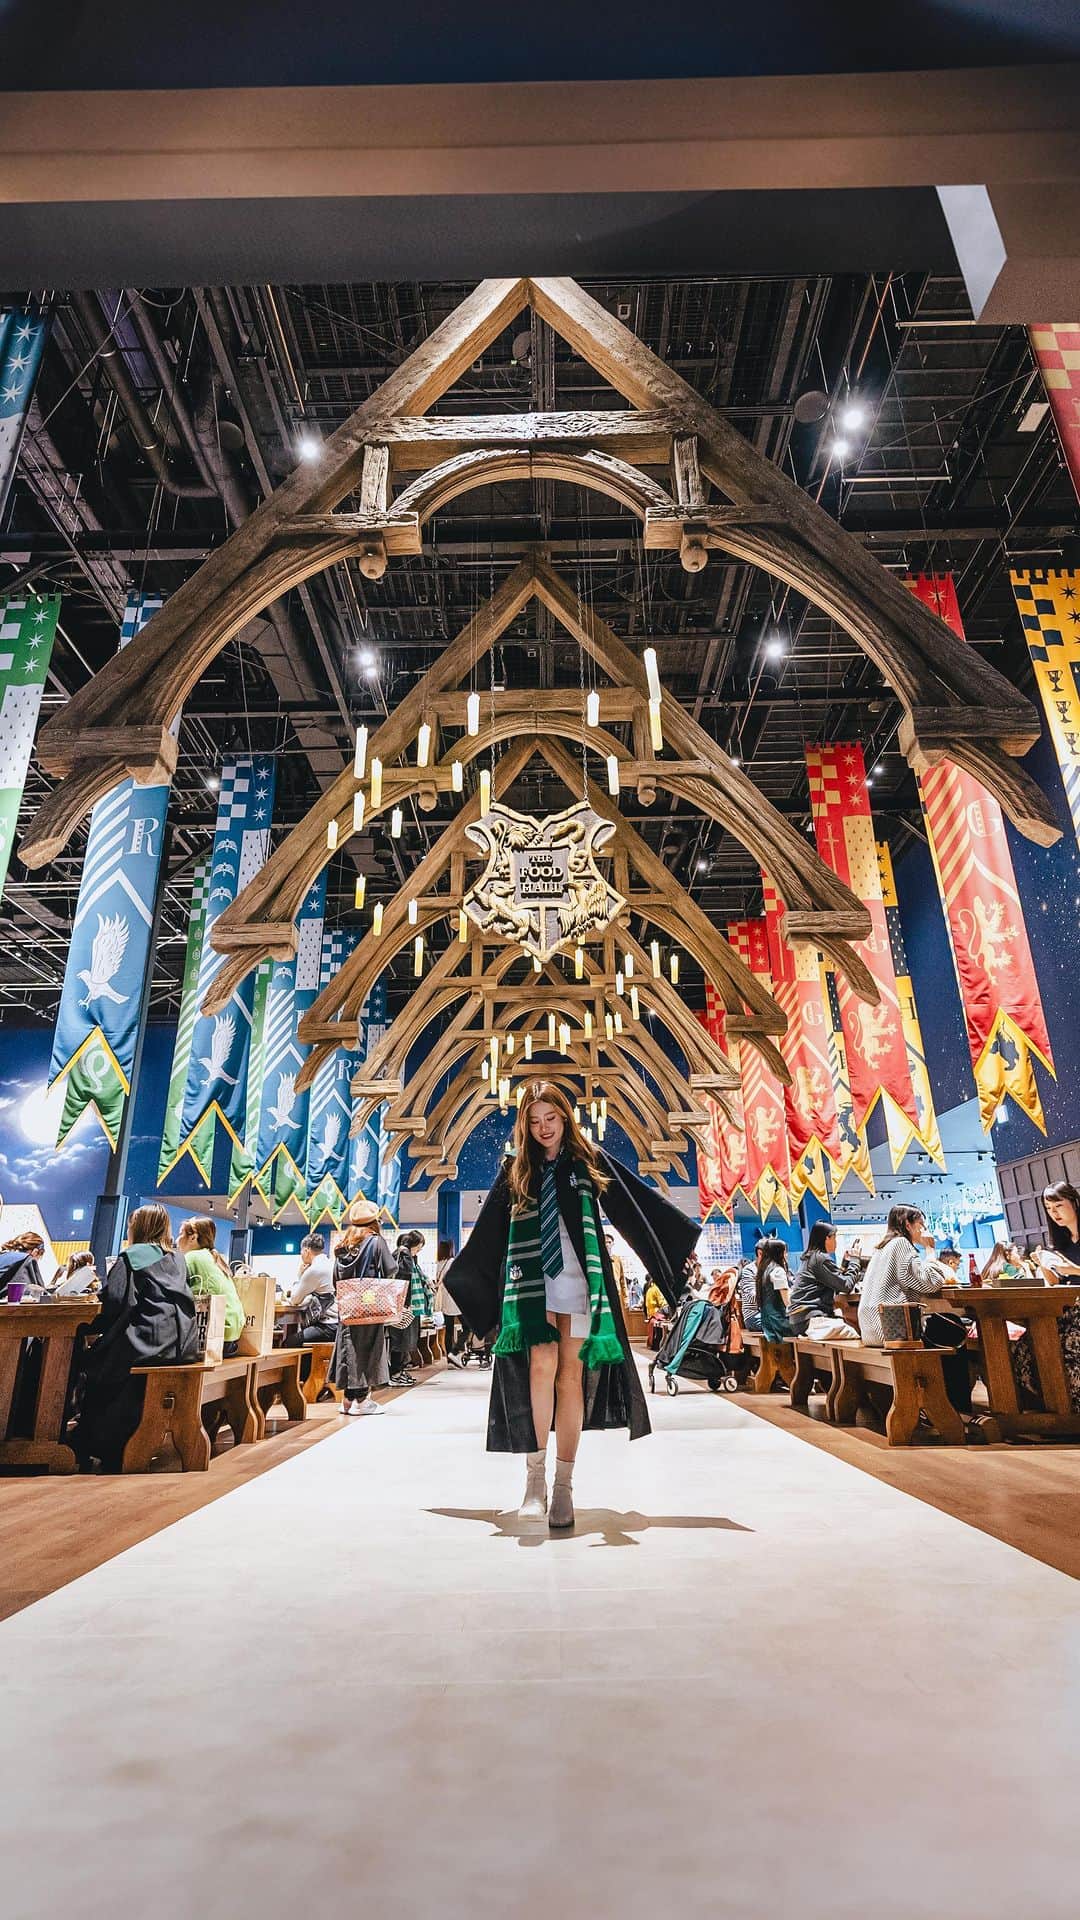 Stella Leeのインスタグラム：「I do not have to fly all the way to London anymore because Harry Potter Studio Tour is available in Tokyo from this year🪄✨✨✨  I grew up watching and reading Harry Potter books like most millennials did. And it’s like a dream come true to visit the studio in real. Yes there are theme parks in USJ, Osaka but this Studio Tour is more massive and they feature props as well as behind the scene of making the movies  You can also see and experience  ✅ Privet Drive ✅ Hogwarts ✅ Diagon Alley ✅ Ministry of Magic ✅ Forbidden’s Forest ✅ And others  Experience being a quidditch player or supporting your house, eat at the Great Hall, enjoy Butterbeer, and shop your Wizard robe and wand here ✨✨✨ The magic is real ✨ Who’s still waiting for their letter too? ✉️🦉🚂」